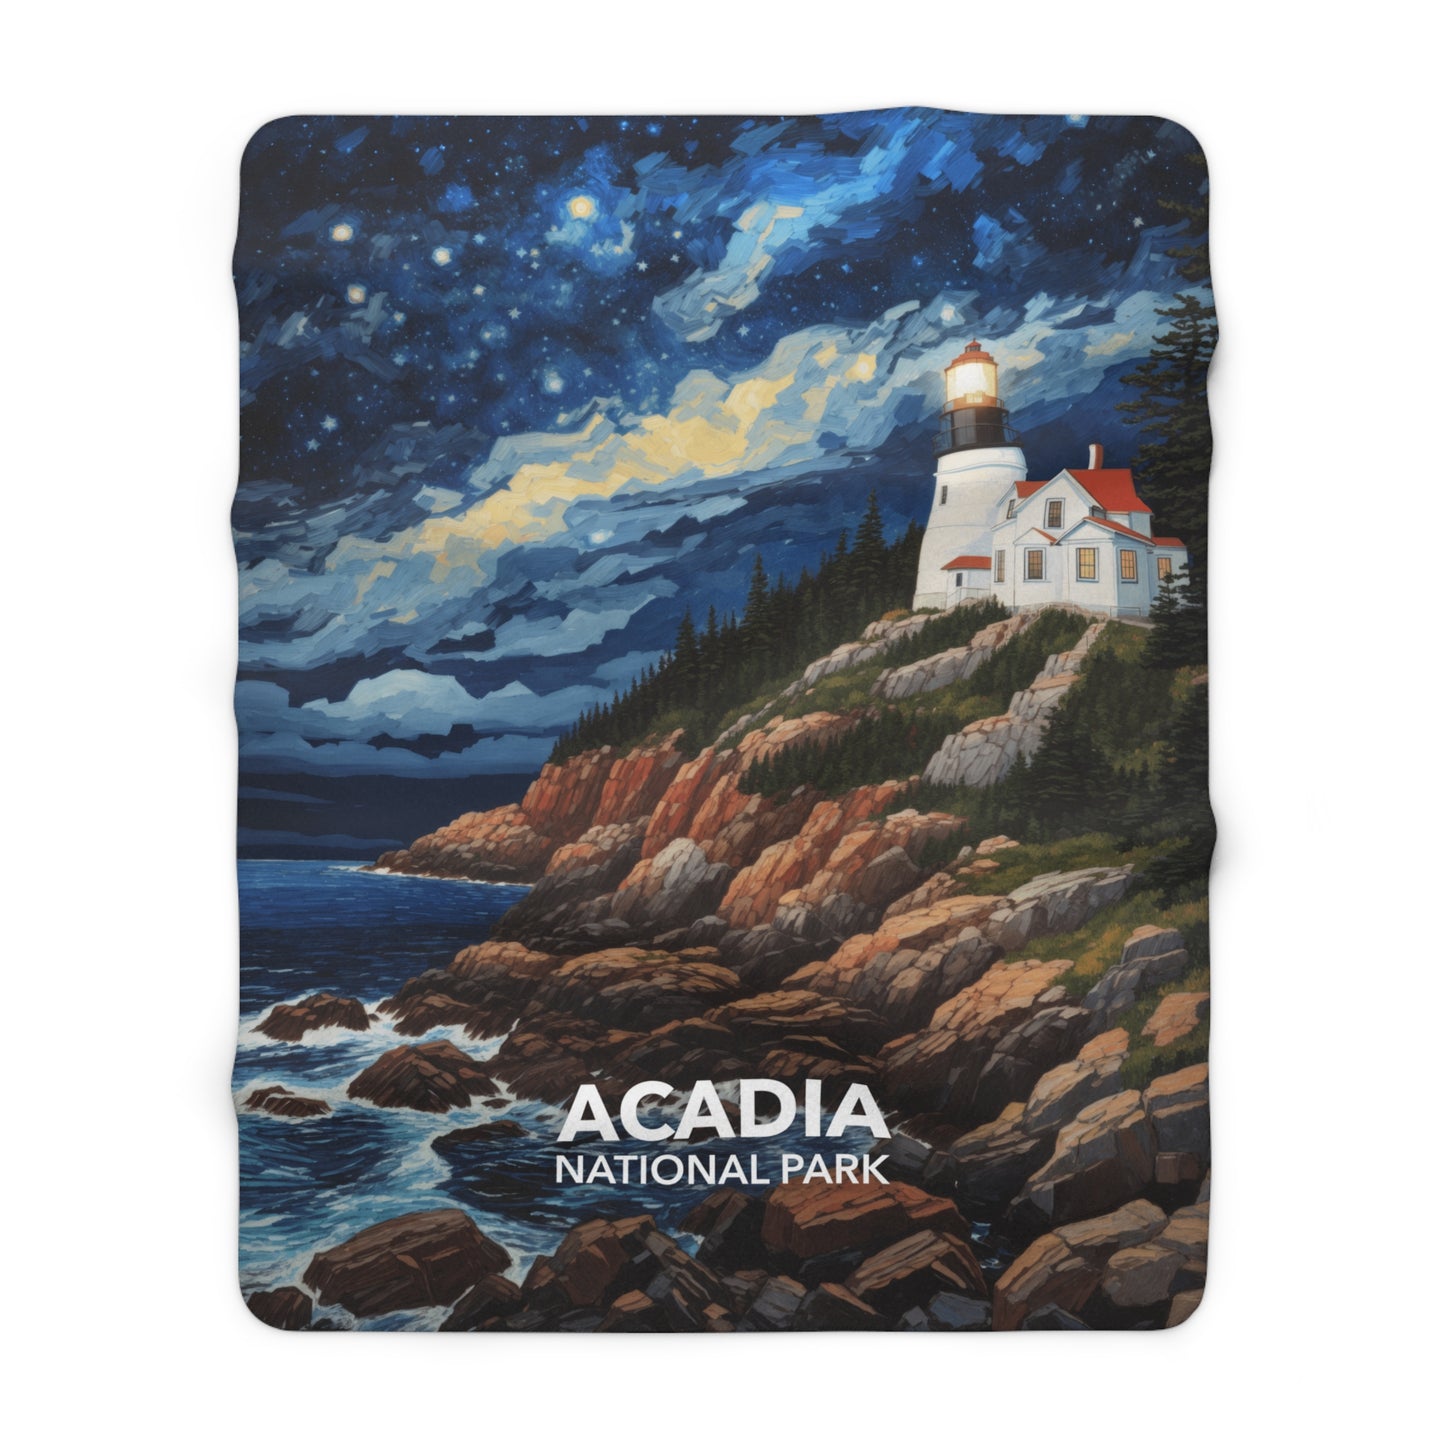 Acadia National Park Sherpa Blanket - The Starry Night